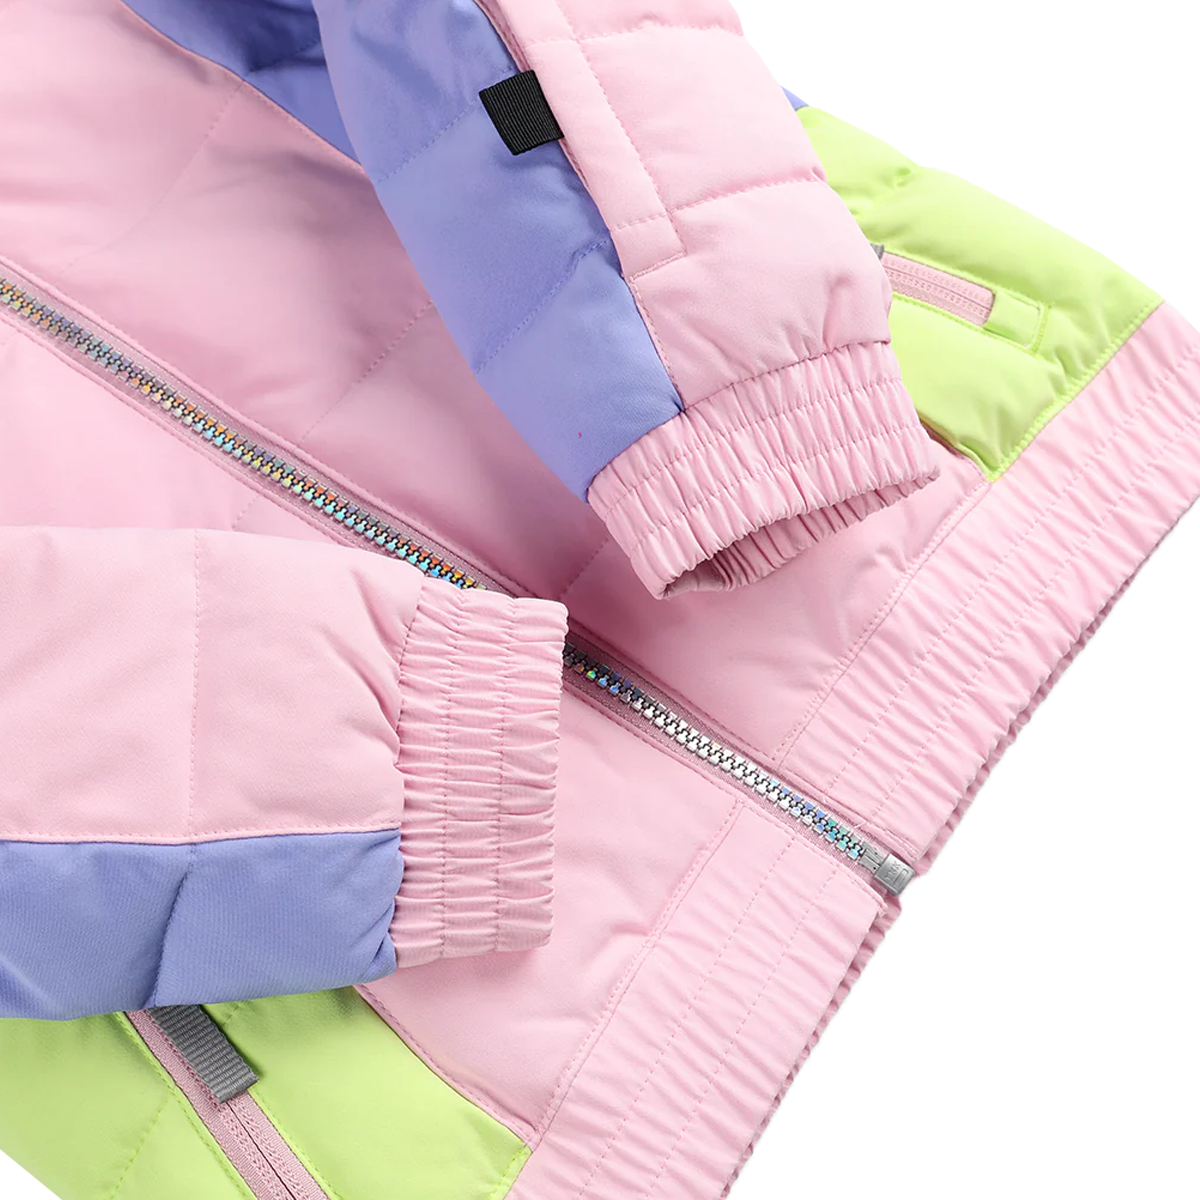 Youth Little Zadie Synthetic Down Jacket alternate view